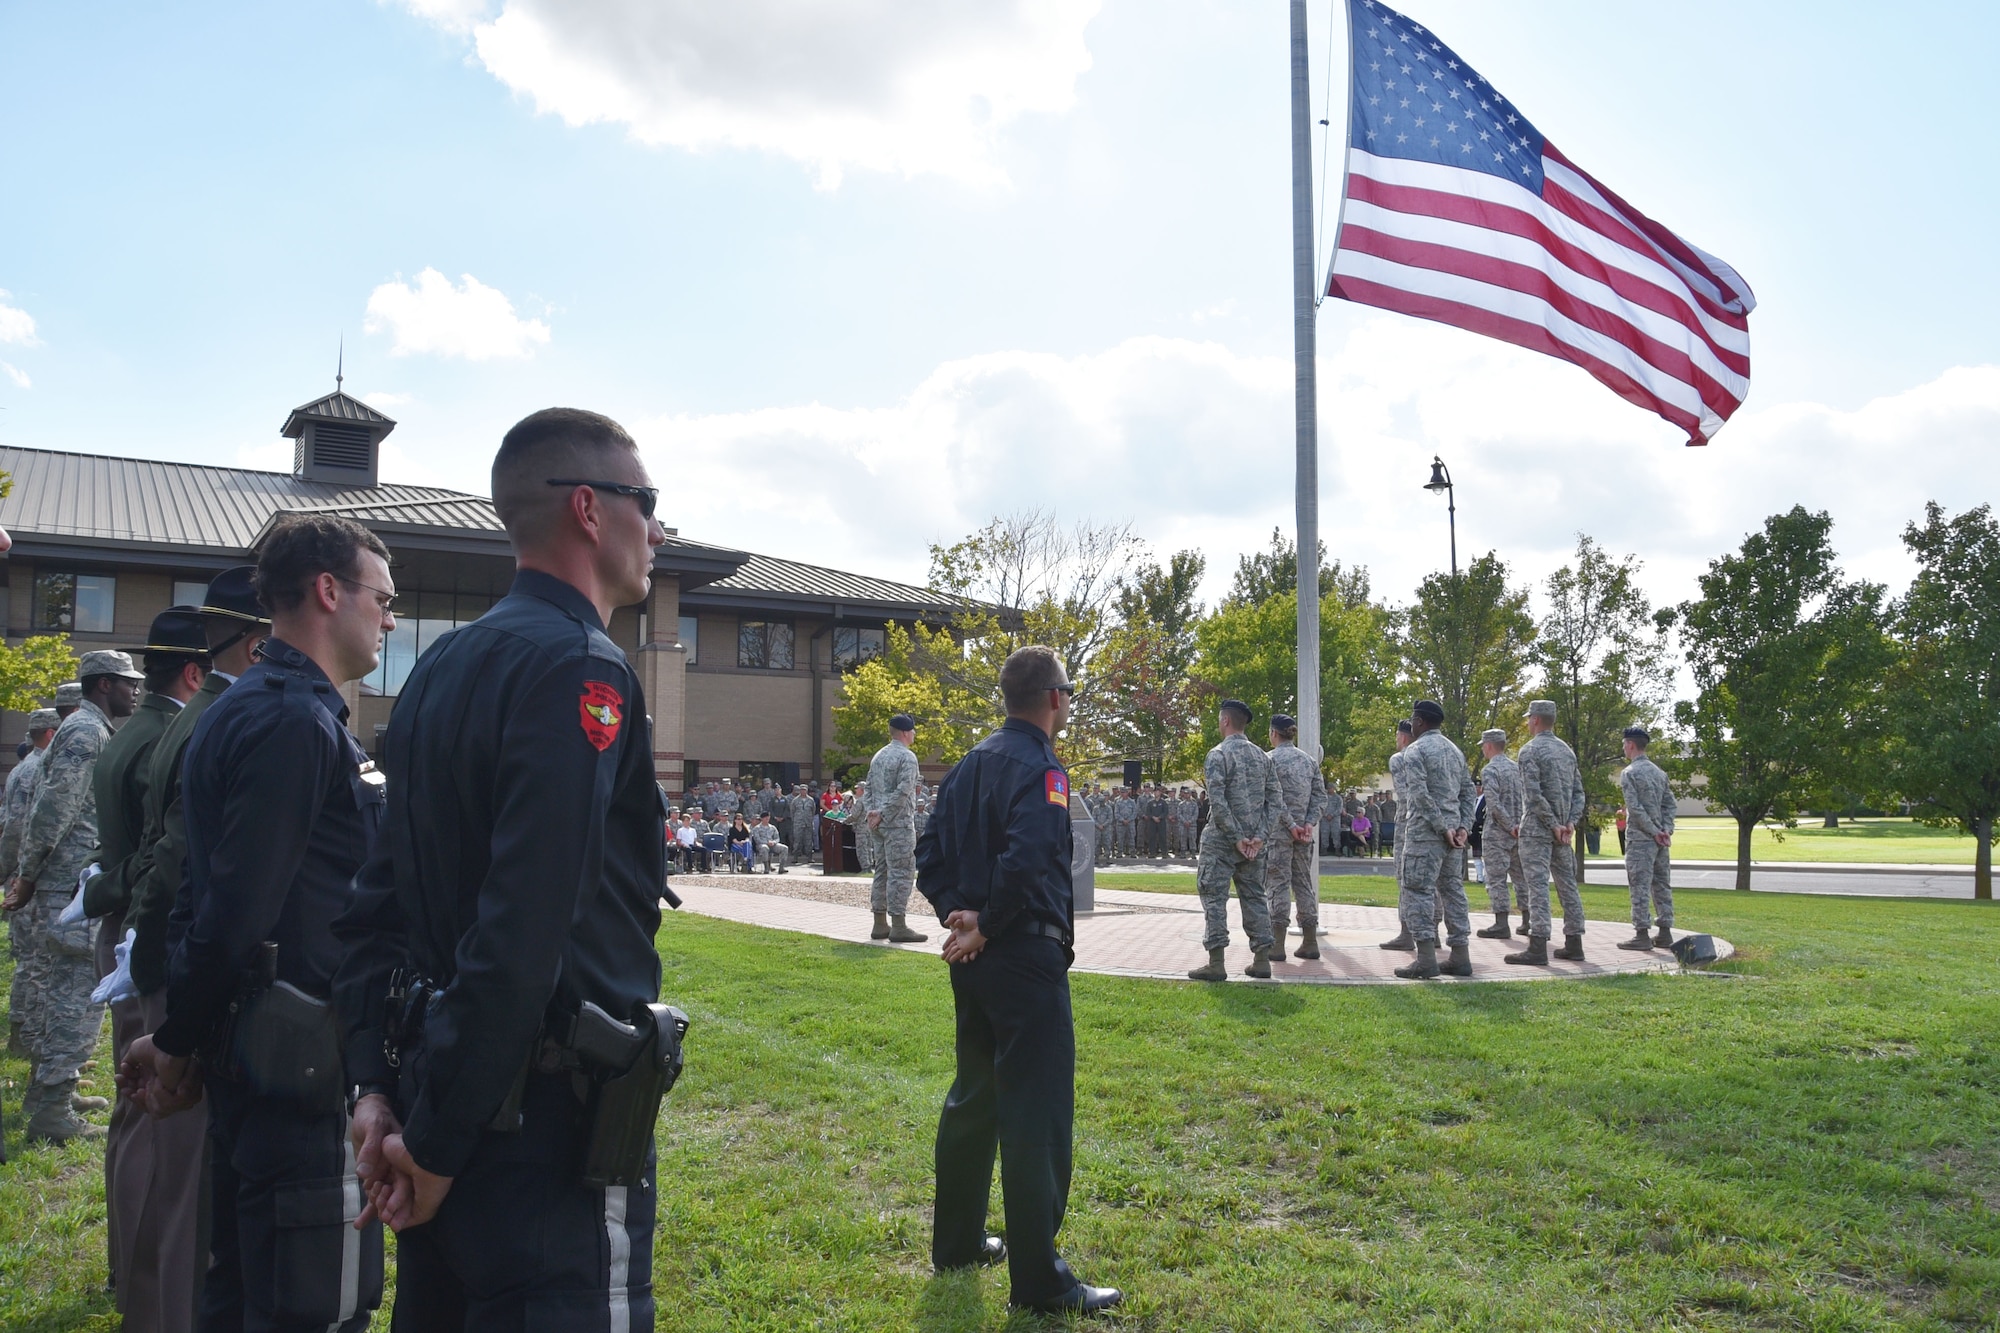 Team McConnell remembered the terror attacks of September 11, 2001, with a Patriot Day ceremony, Sept. 11, 2018, at McConnell Air Force Base, Kan. The ceremony paid special tribute to the victims and families of those lost in New York, Pennsylvania and in the Pentagon.